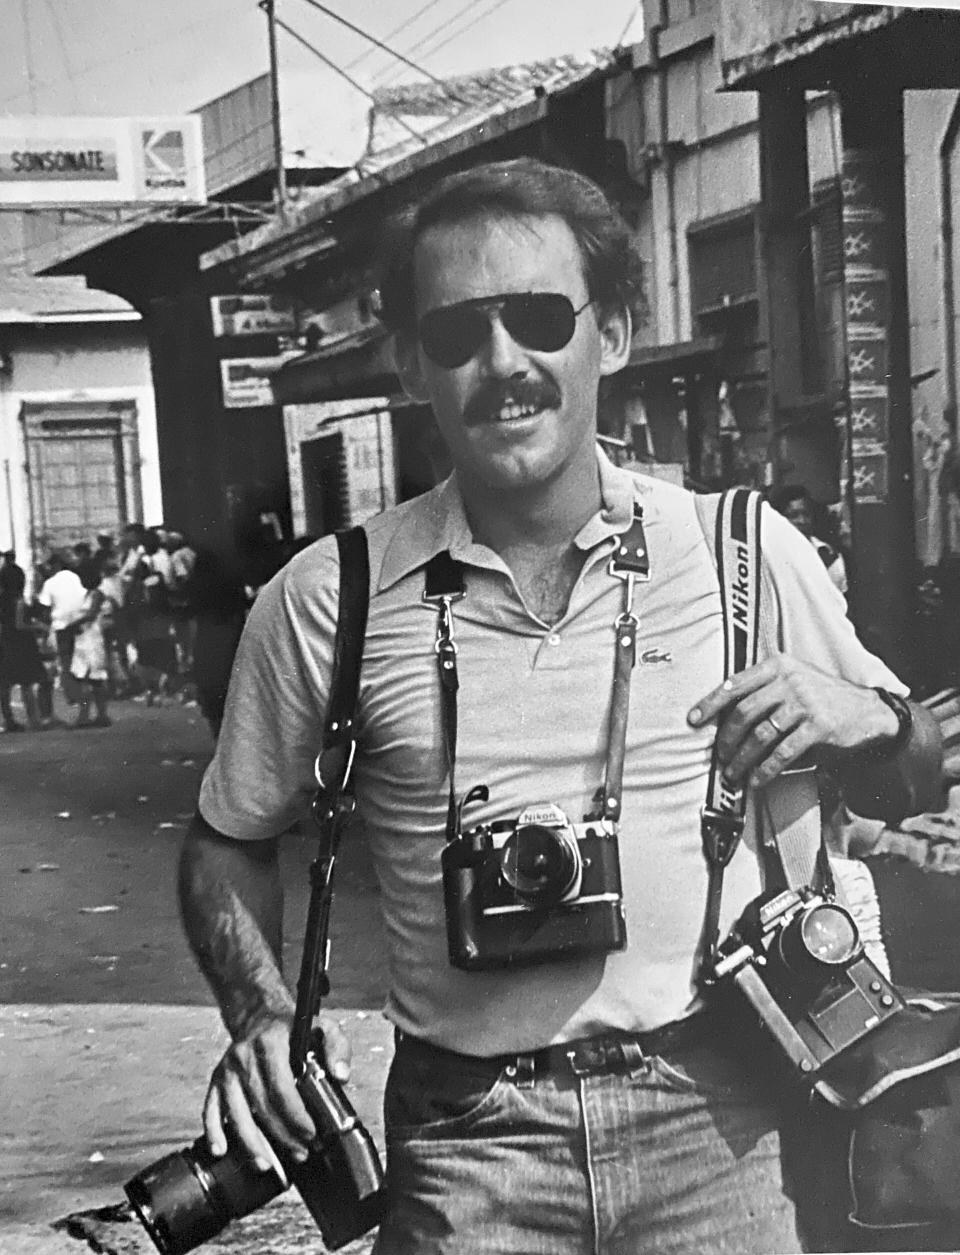 This undated family photo shows photographer Pat Hamilton in El Salvador. Hamilton, a combat veteran of the Vietnam War who covered the civil wars in Central America as a photojournalist for The Associated Press, and who later worked at Reuters covering the Gulf War in Iraq, died Sunday, Aug. 13, 2023, after a long struggle with cancer. He was 74. (Courtesy Sylvia Hamilton via AP)